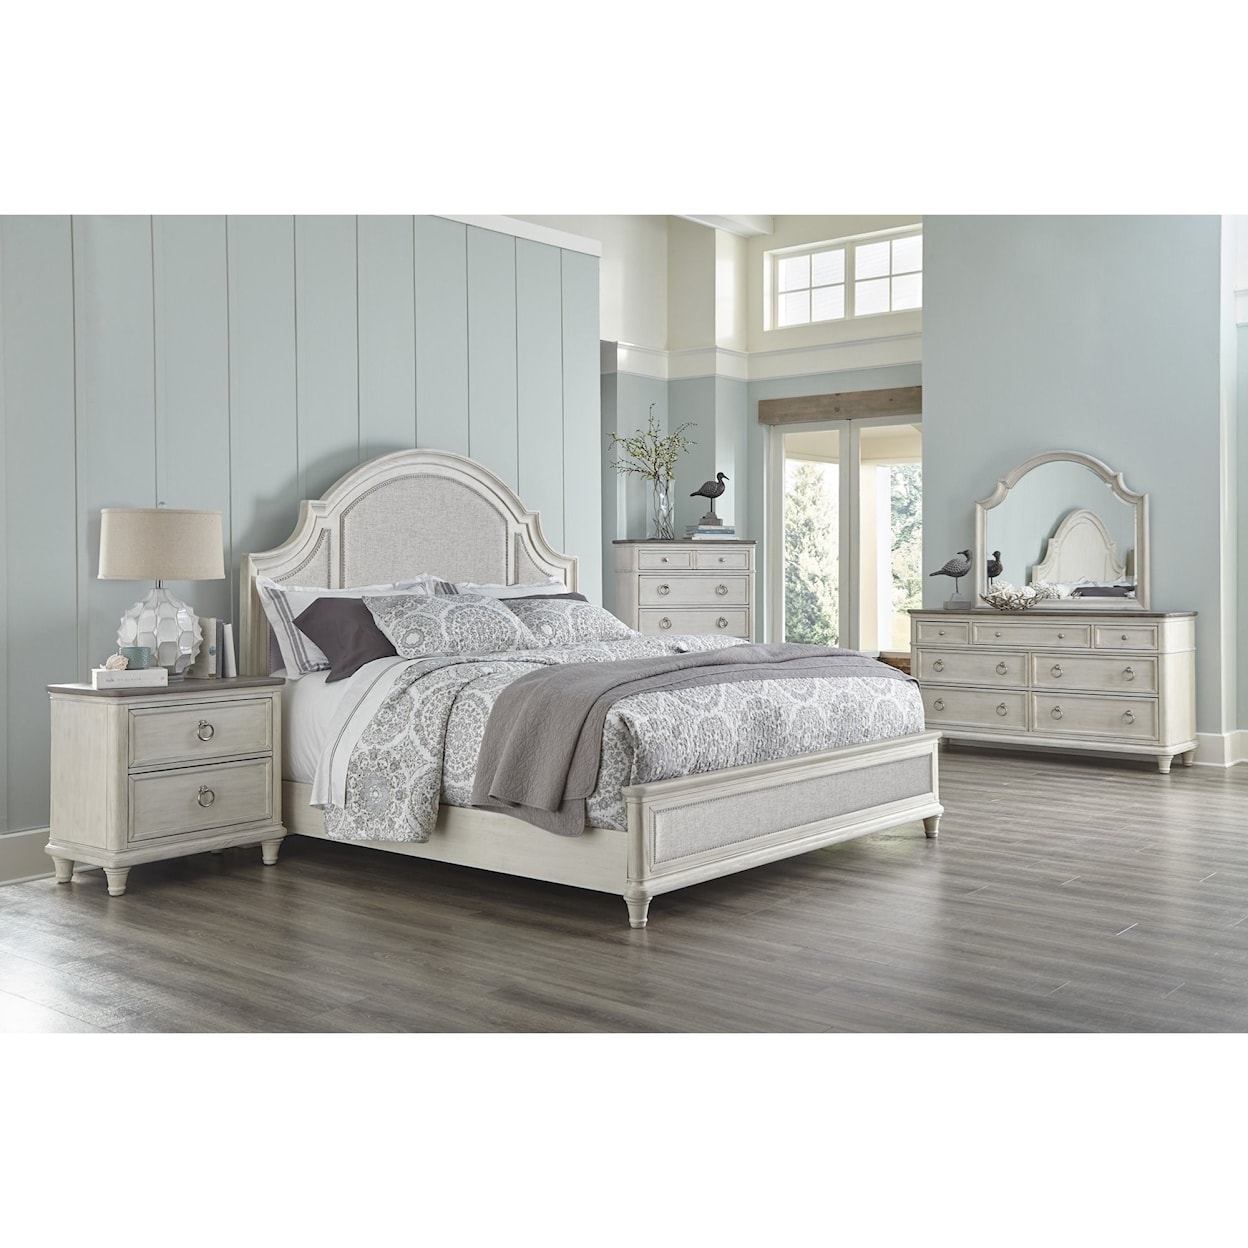 Panama Jack by Palmetto Home Sonoma King Bedroom Group